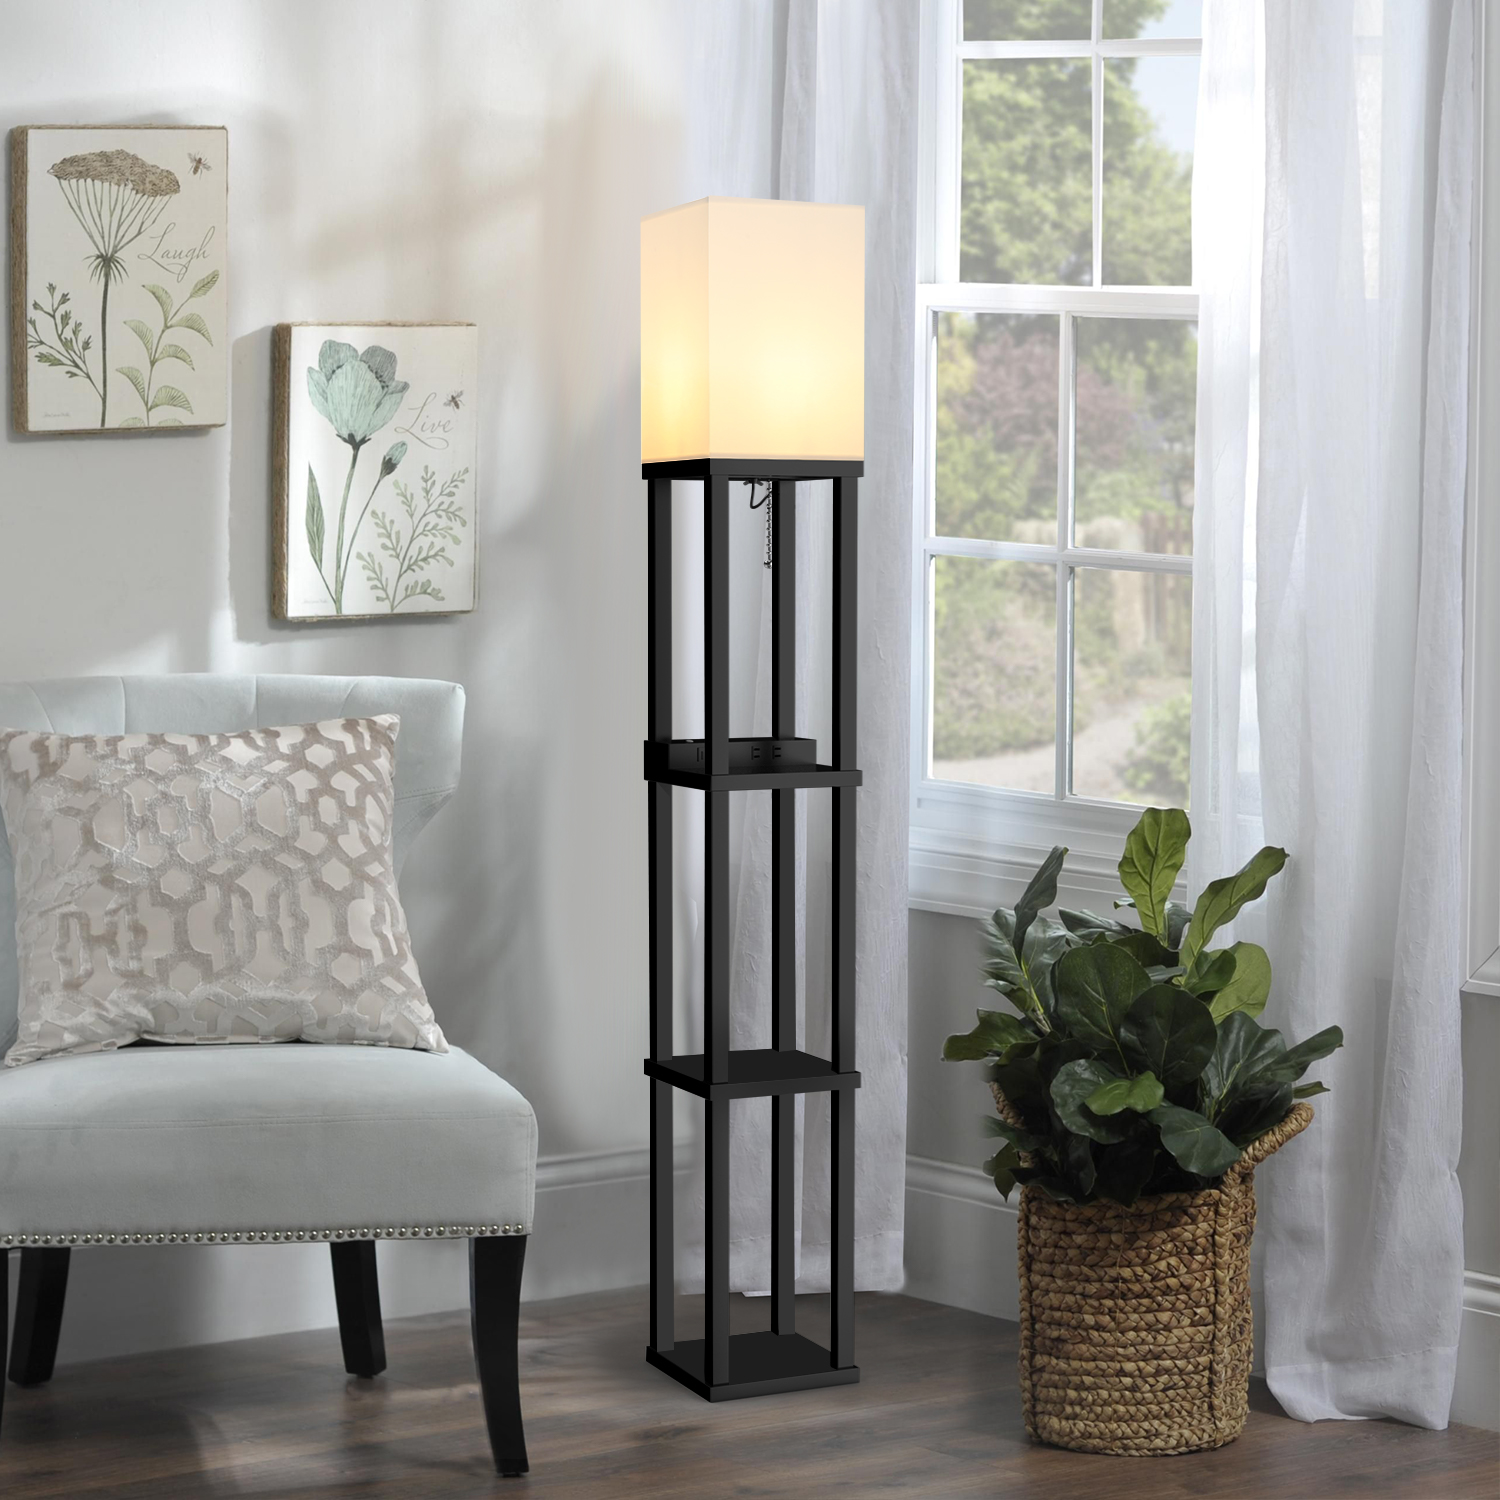 Litupu Bedside Table Shelves Save Space, Tower Floor Lamp With Shelves